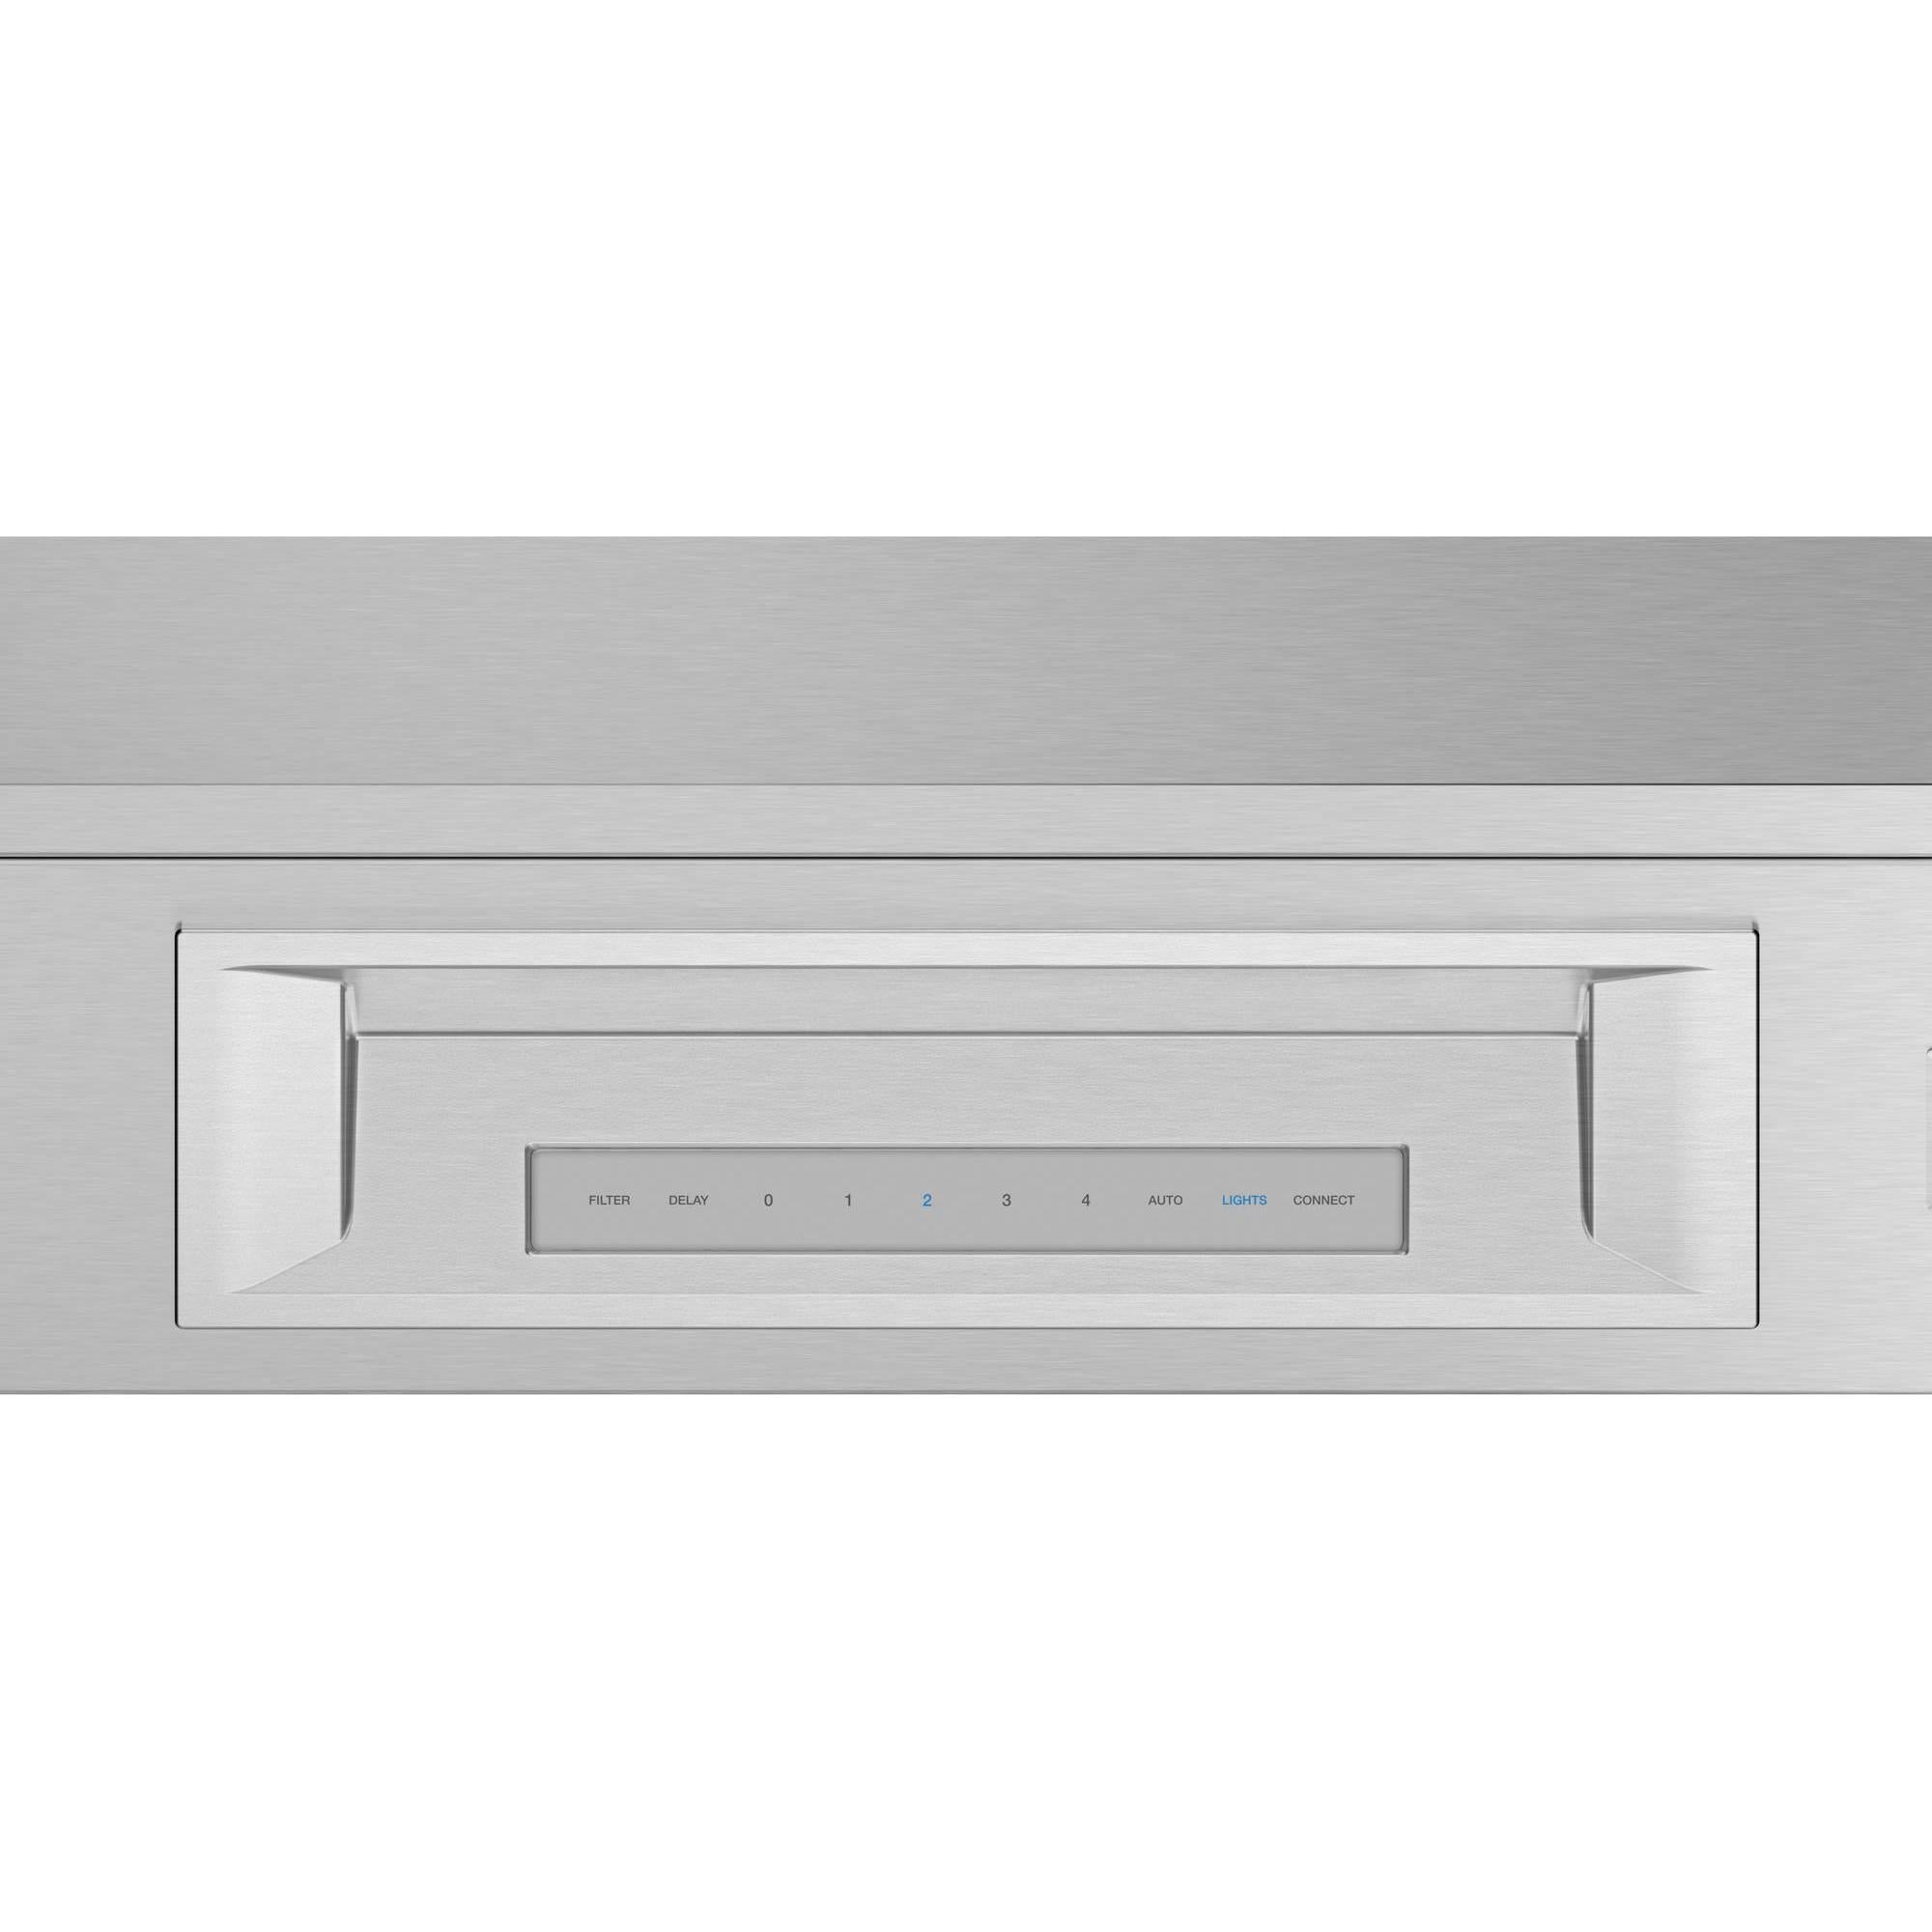 Thermador 54-inch Professional? Built-in Hood Insert VCIN54GWS